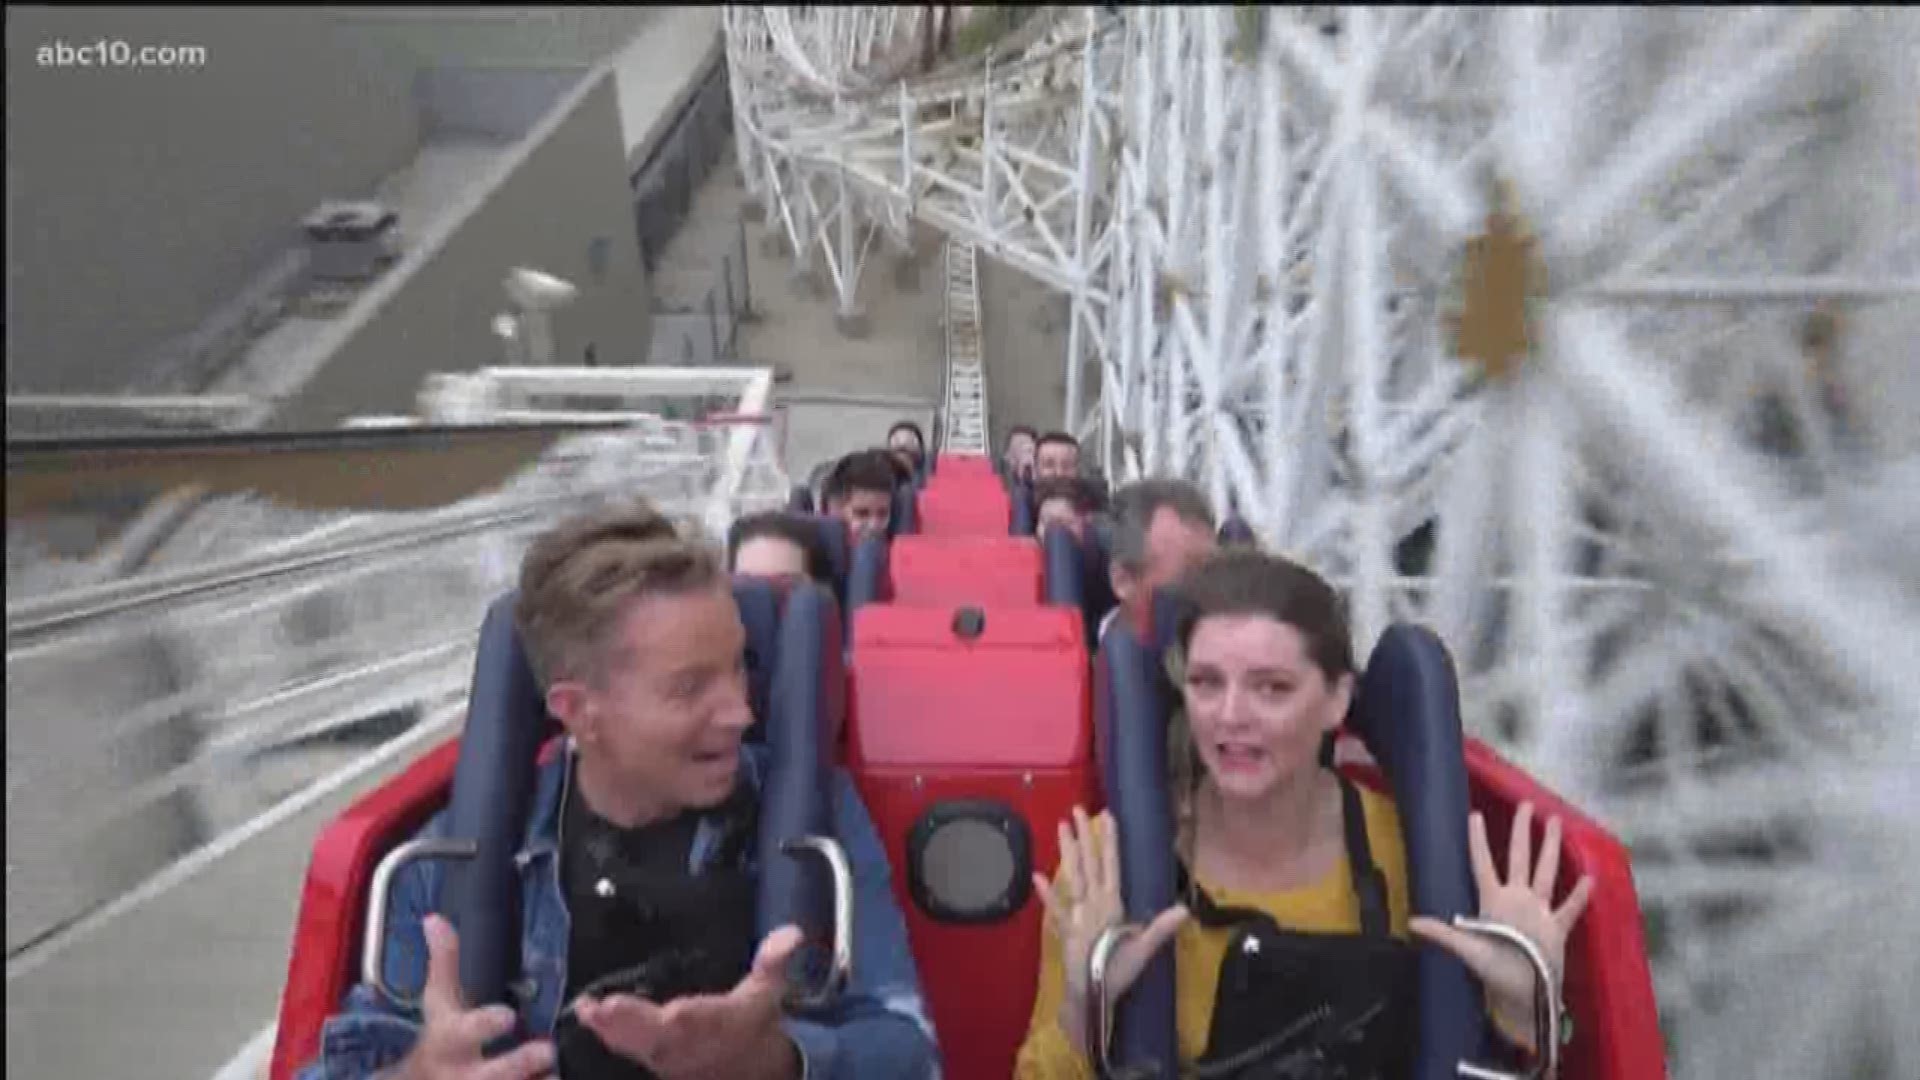 Mark S. Allen is riding the brand new Incredicoaster with one of the people who helped create it.